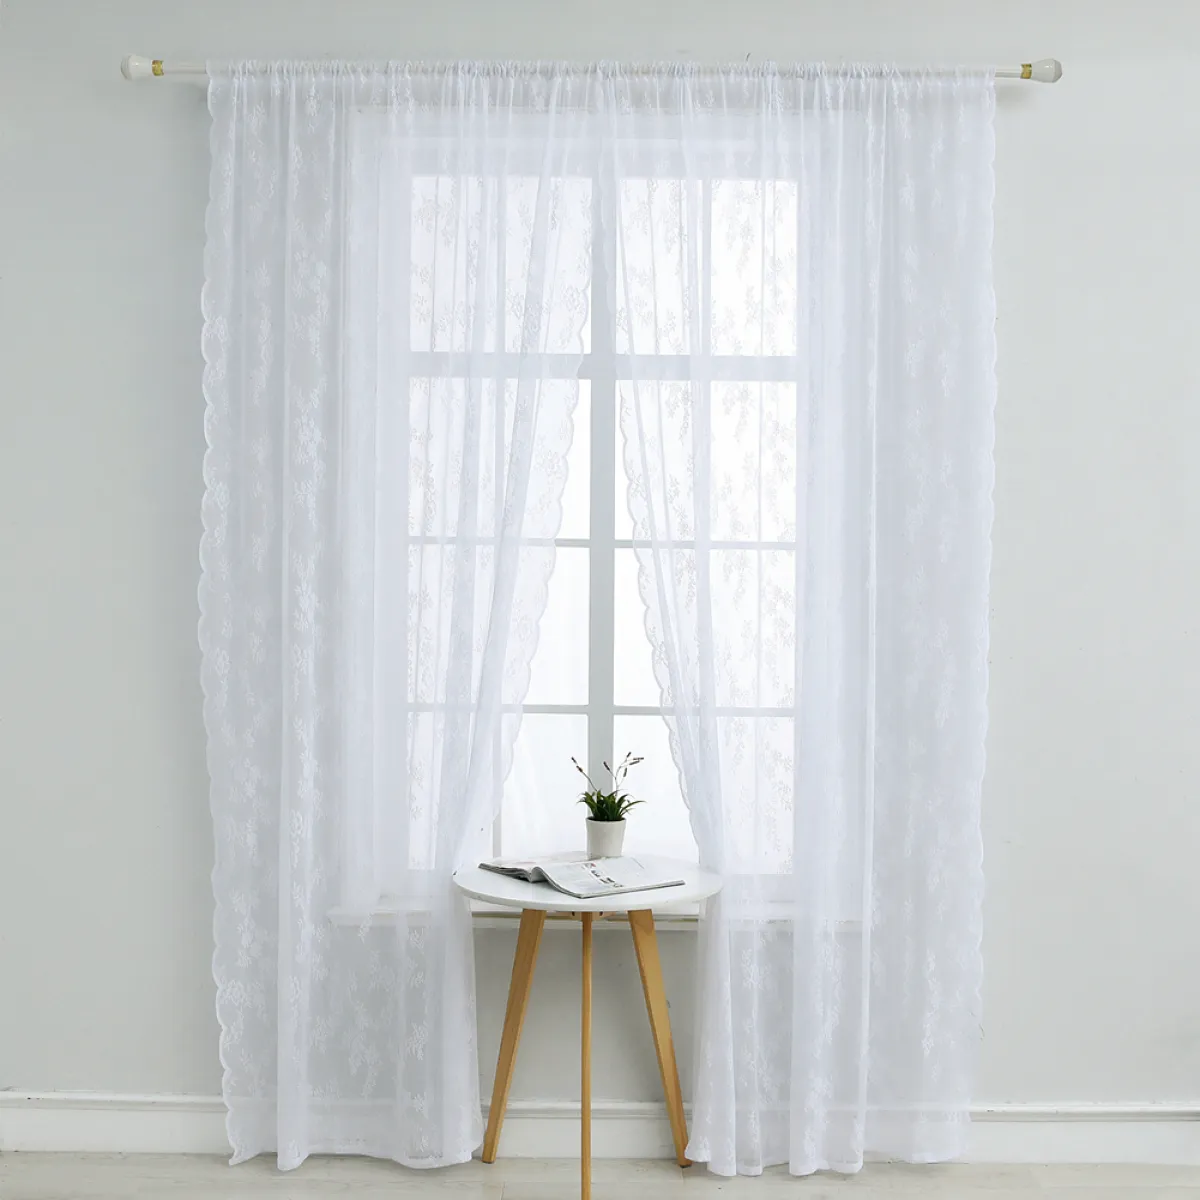 White Lace Curtain Sheer Voile Panel Romantic Wave Sides Embroidery Floral Country Curtain Window Gauze Drape Tulle For Living Room Bedroom Balcony Sliding Glass Door Fit For Various Blackout Curtains